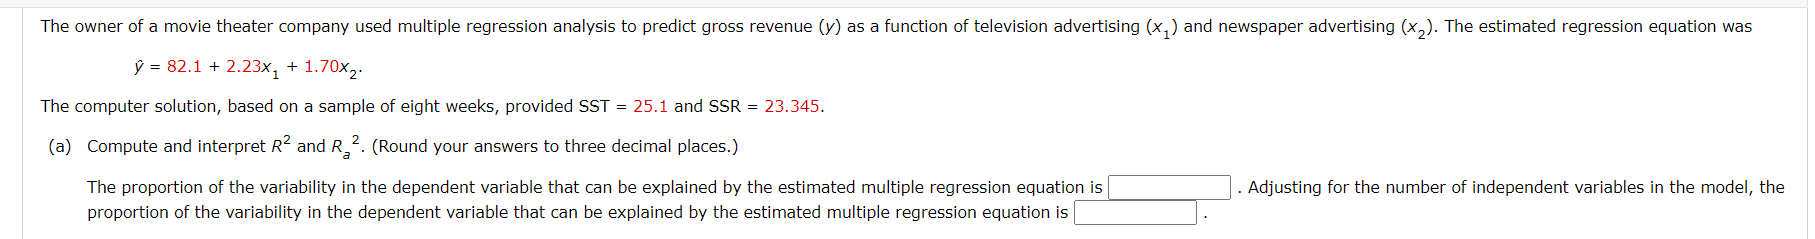 The owner of a movie theater company used multiple regression analysis to predict gross revenue (y) as a function of television advertising (x,) and newspaper advertising (x,). The estimated regression equation was
ŷ = 82.1 + 2.23x, + 1.70x2.
The computer solution, based on a sample of eight weeks, provided SST = 25.1 and SSR = 23.345.
(a) Compute and interpret R2 and R_2. (Round your answers to three decimal places.)
. Adjusting for the number of independent variables in the model, the
The proportion of the variability in the dependent variable that can be explained by the estimated multiple regression equation is
proportion of the variability in the dependent variable that can be explained by the estimated multiple regression equation is
